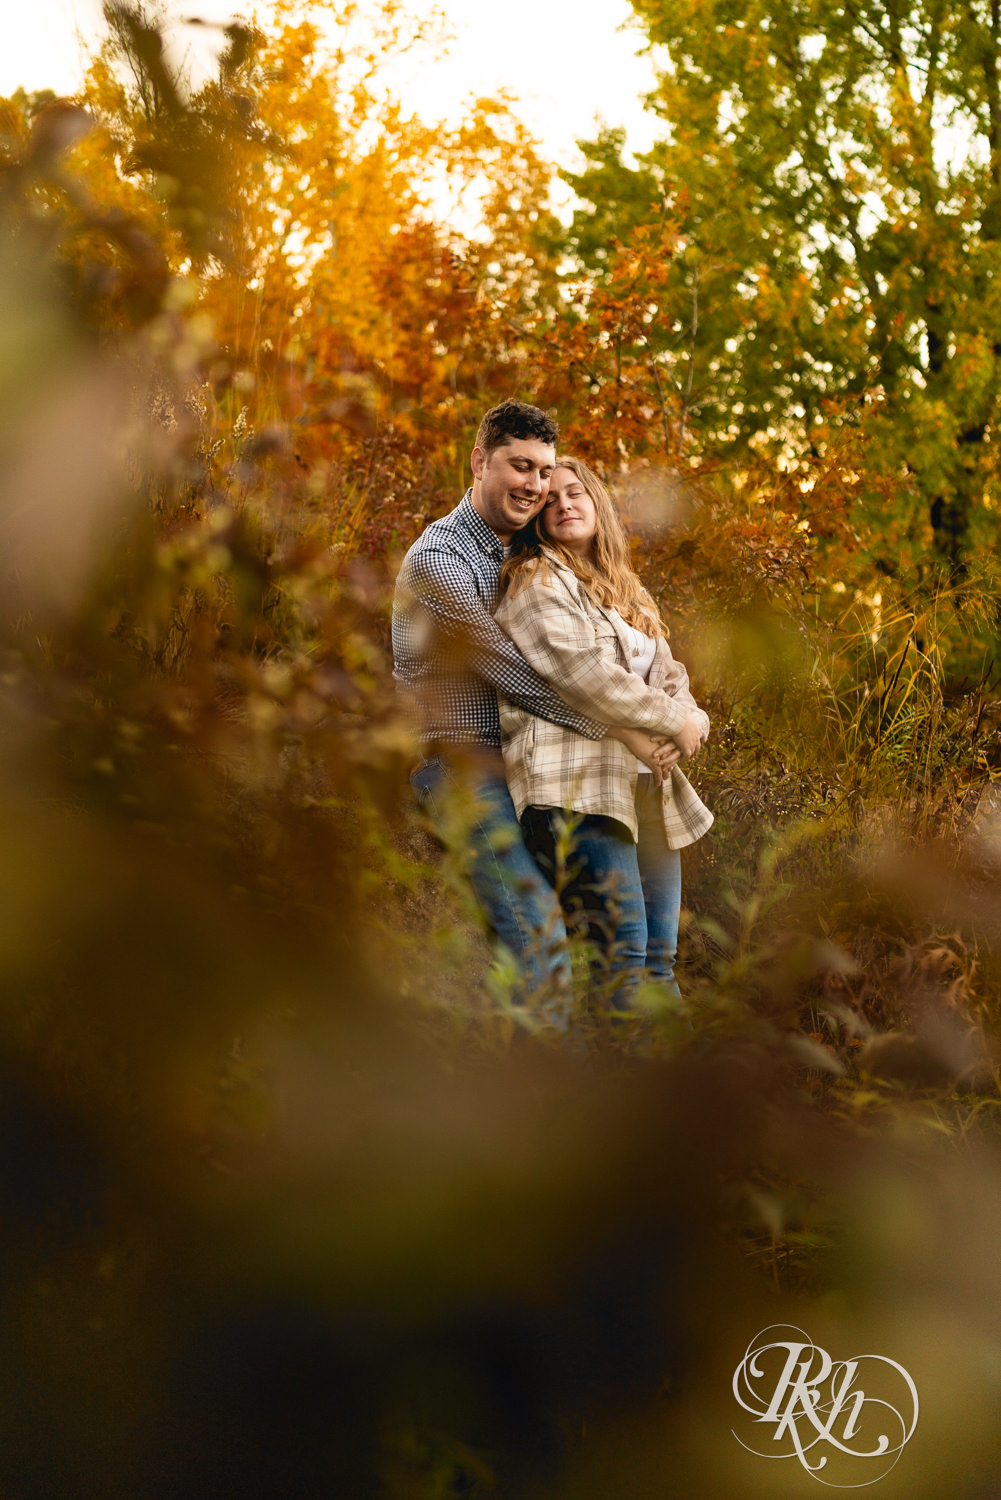 Man and woman in jeans snuggle during fall engagement photos at Lebanon Hills Regional Park in Eagan, Minnesota.